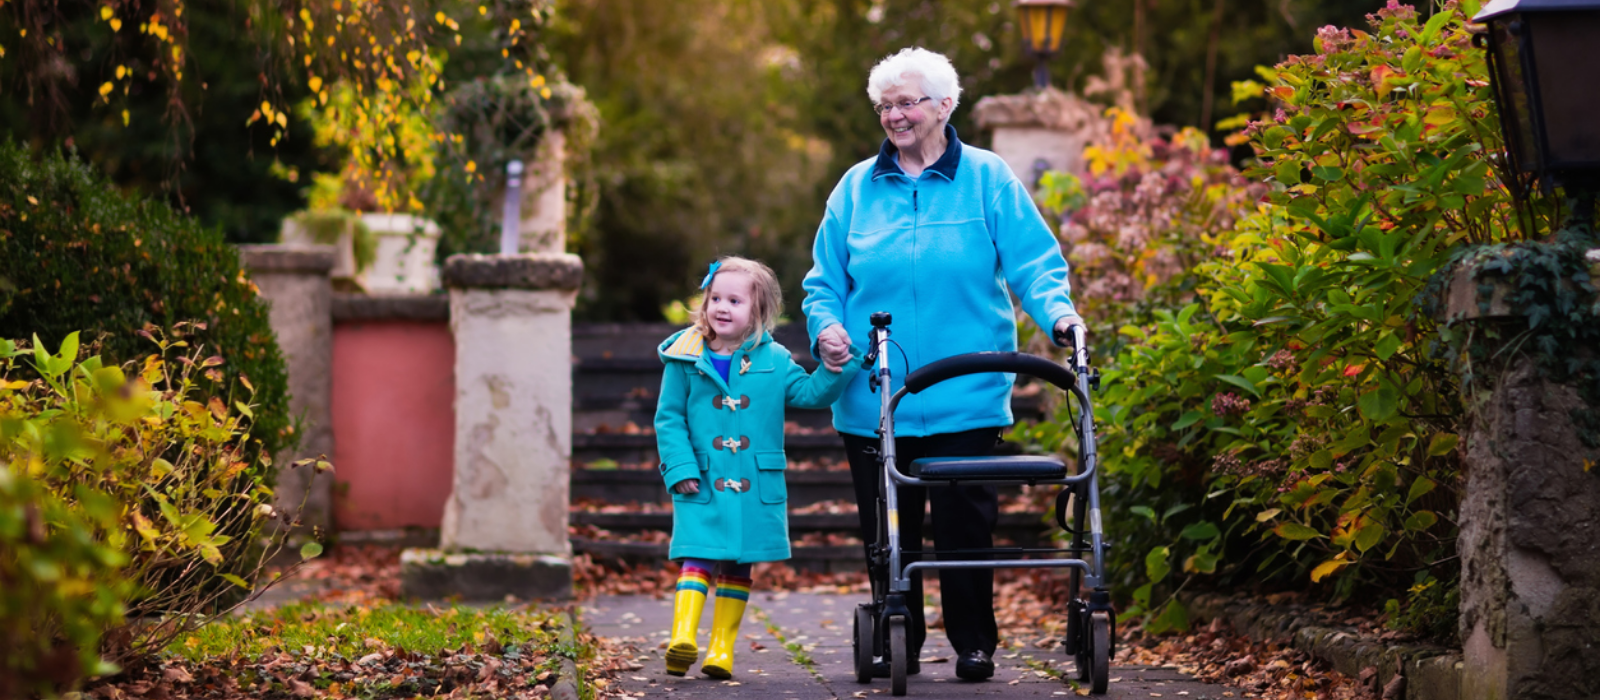 A grandmother with a rollator and her granddaughter walk down a park path smiling.